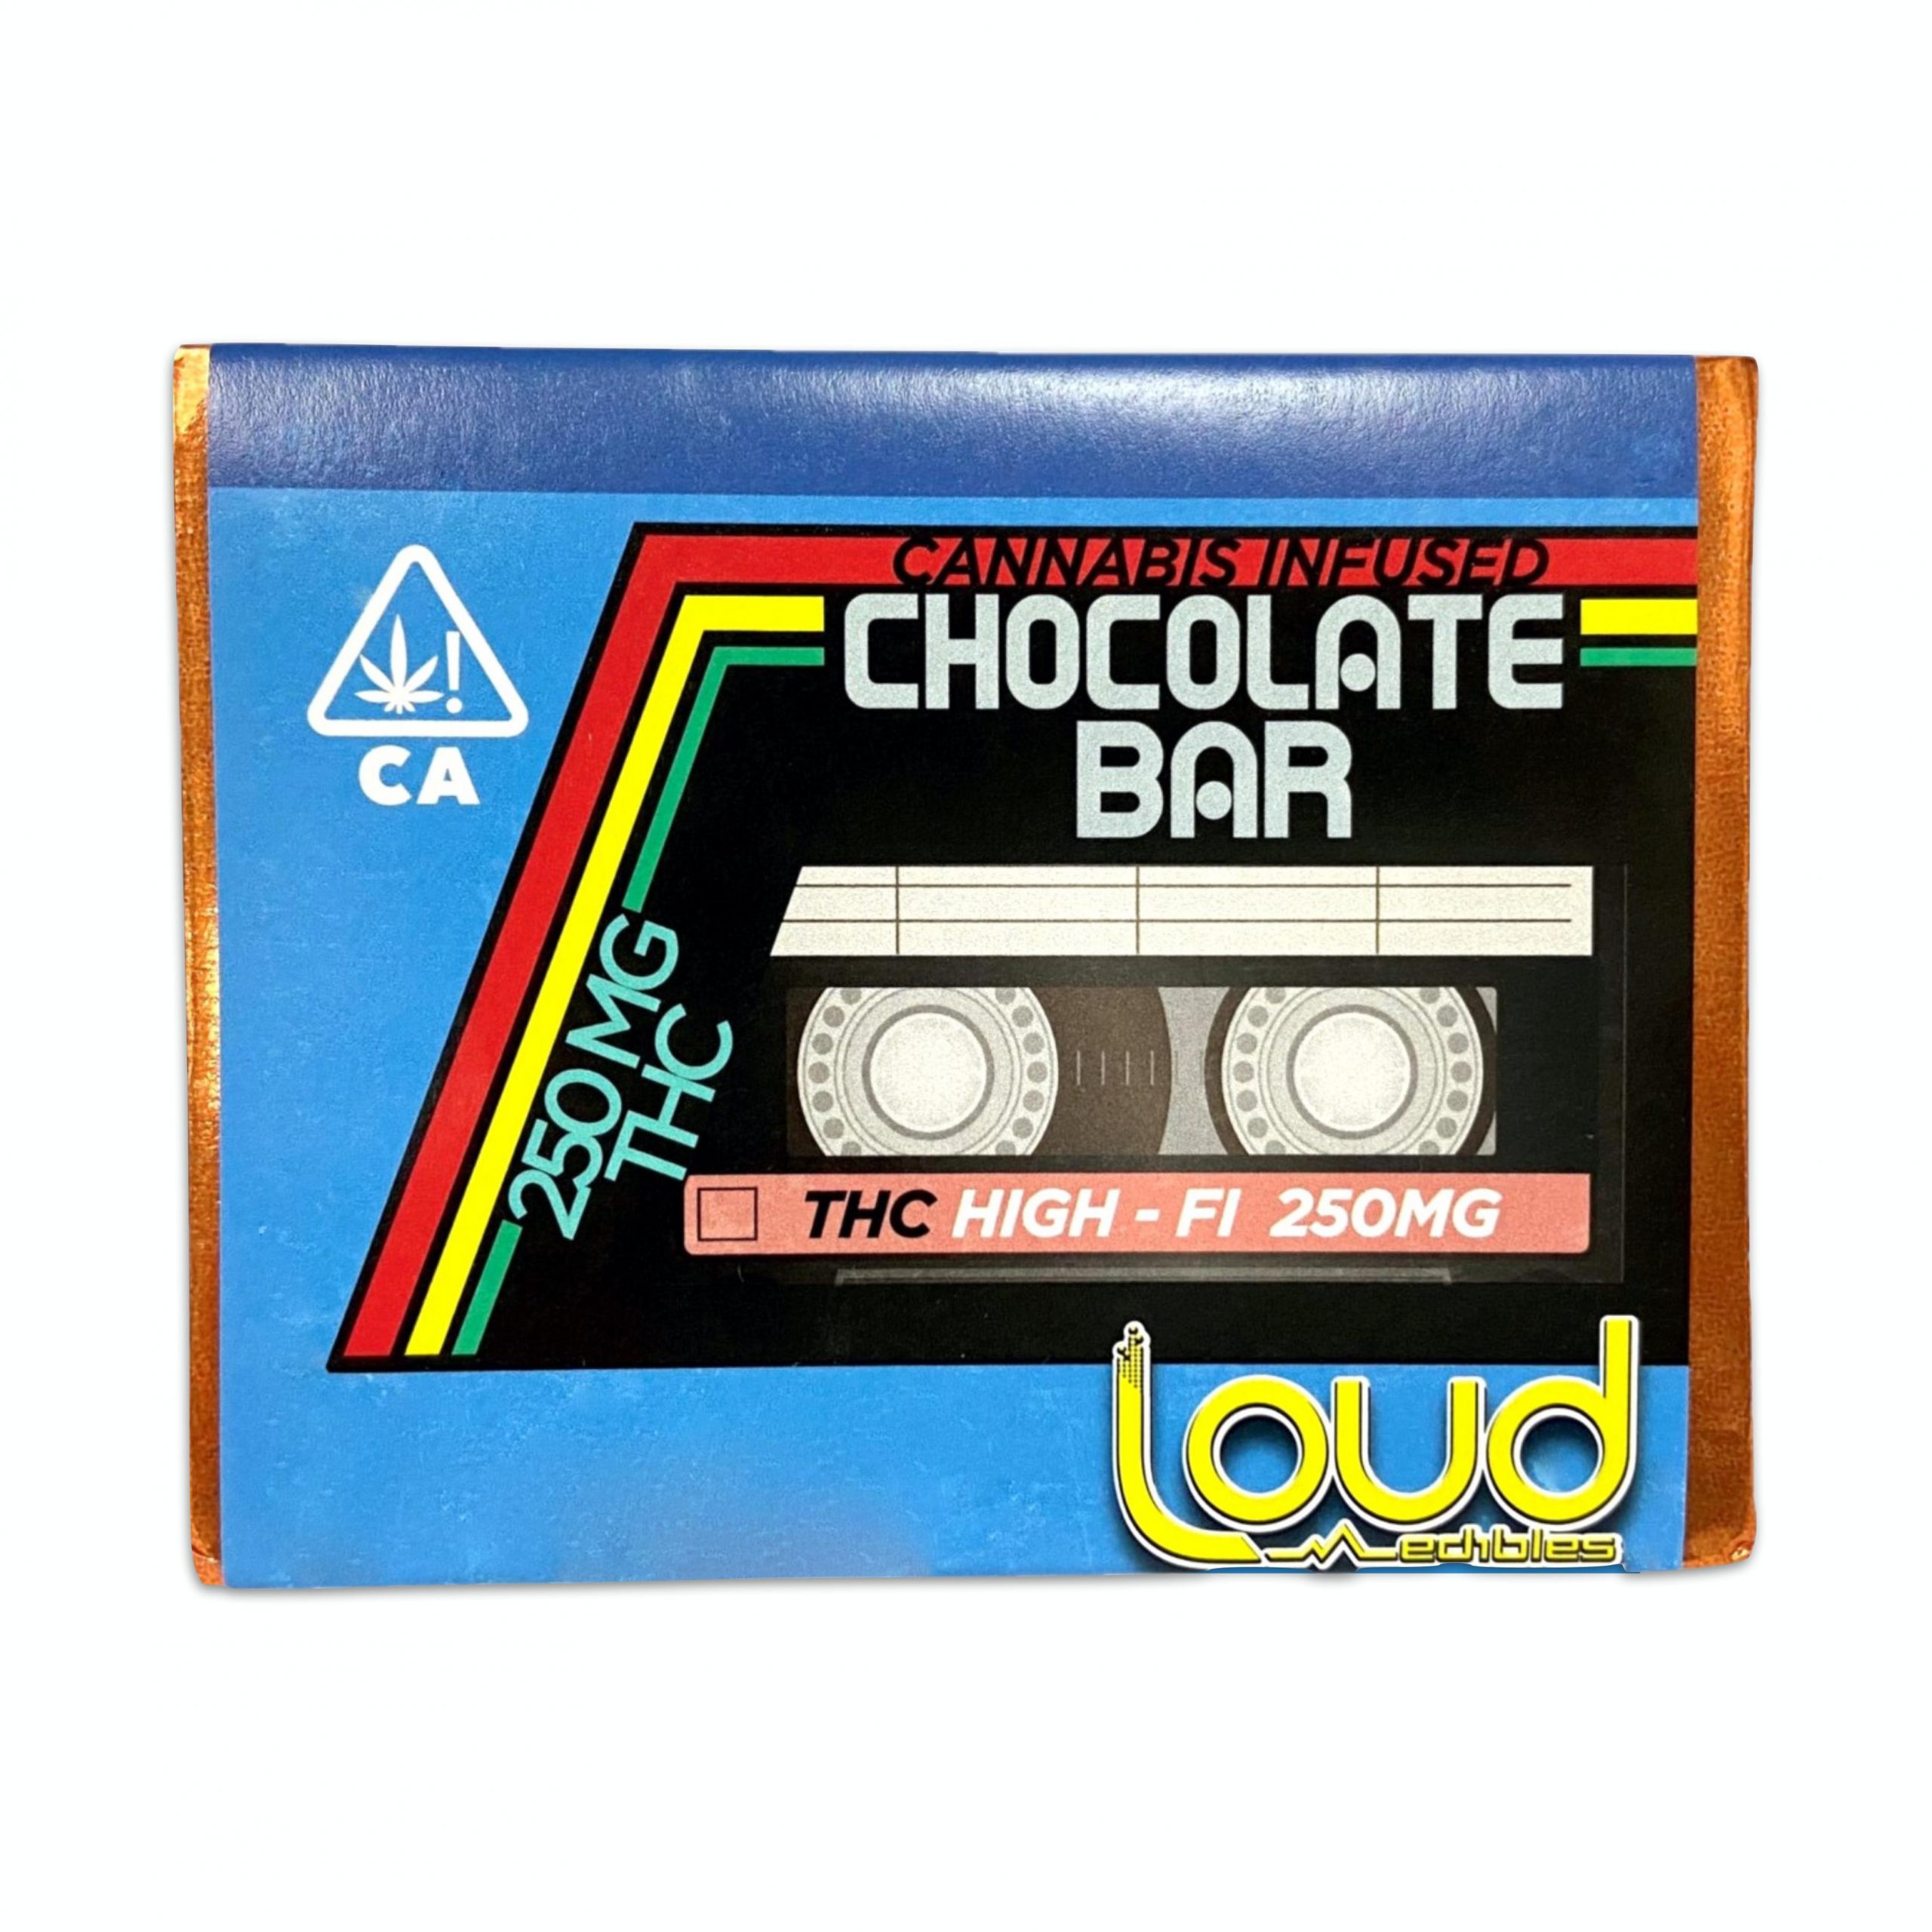 Loud Edibles Chocolate Bar 250mg delivery in los angeles